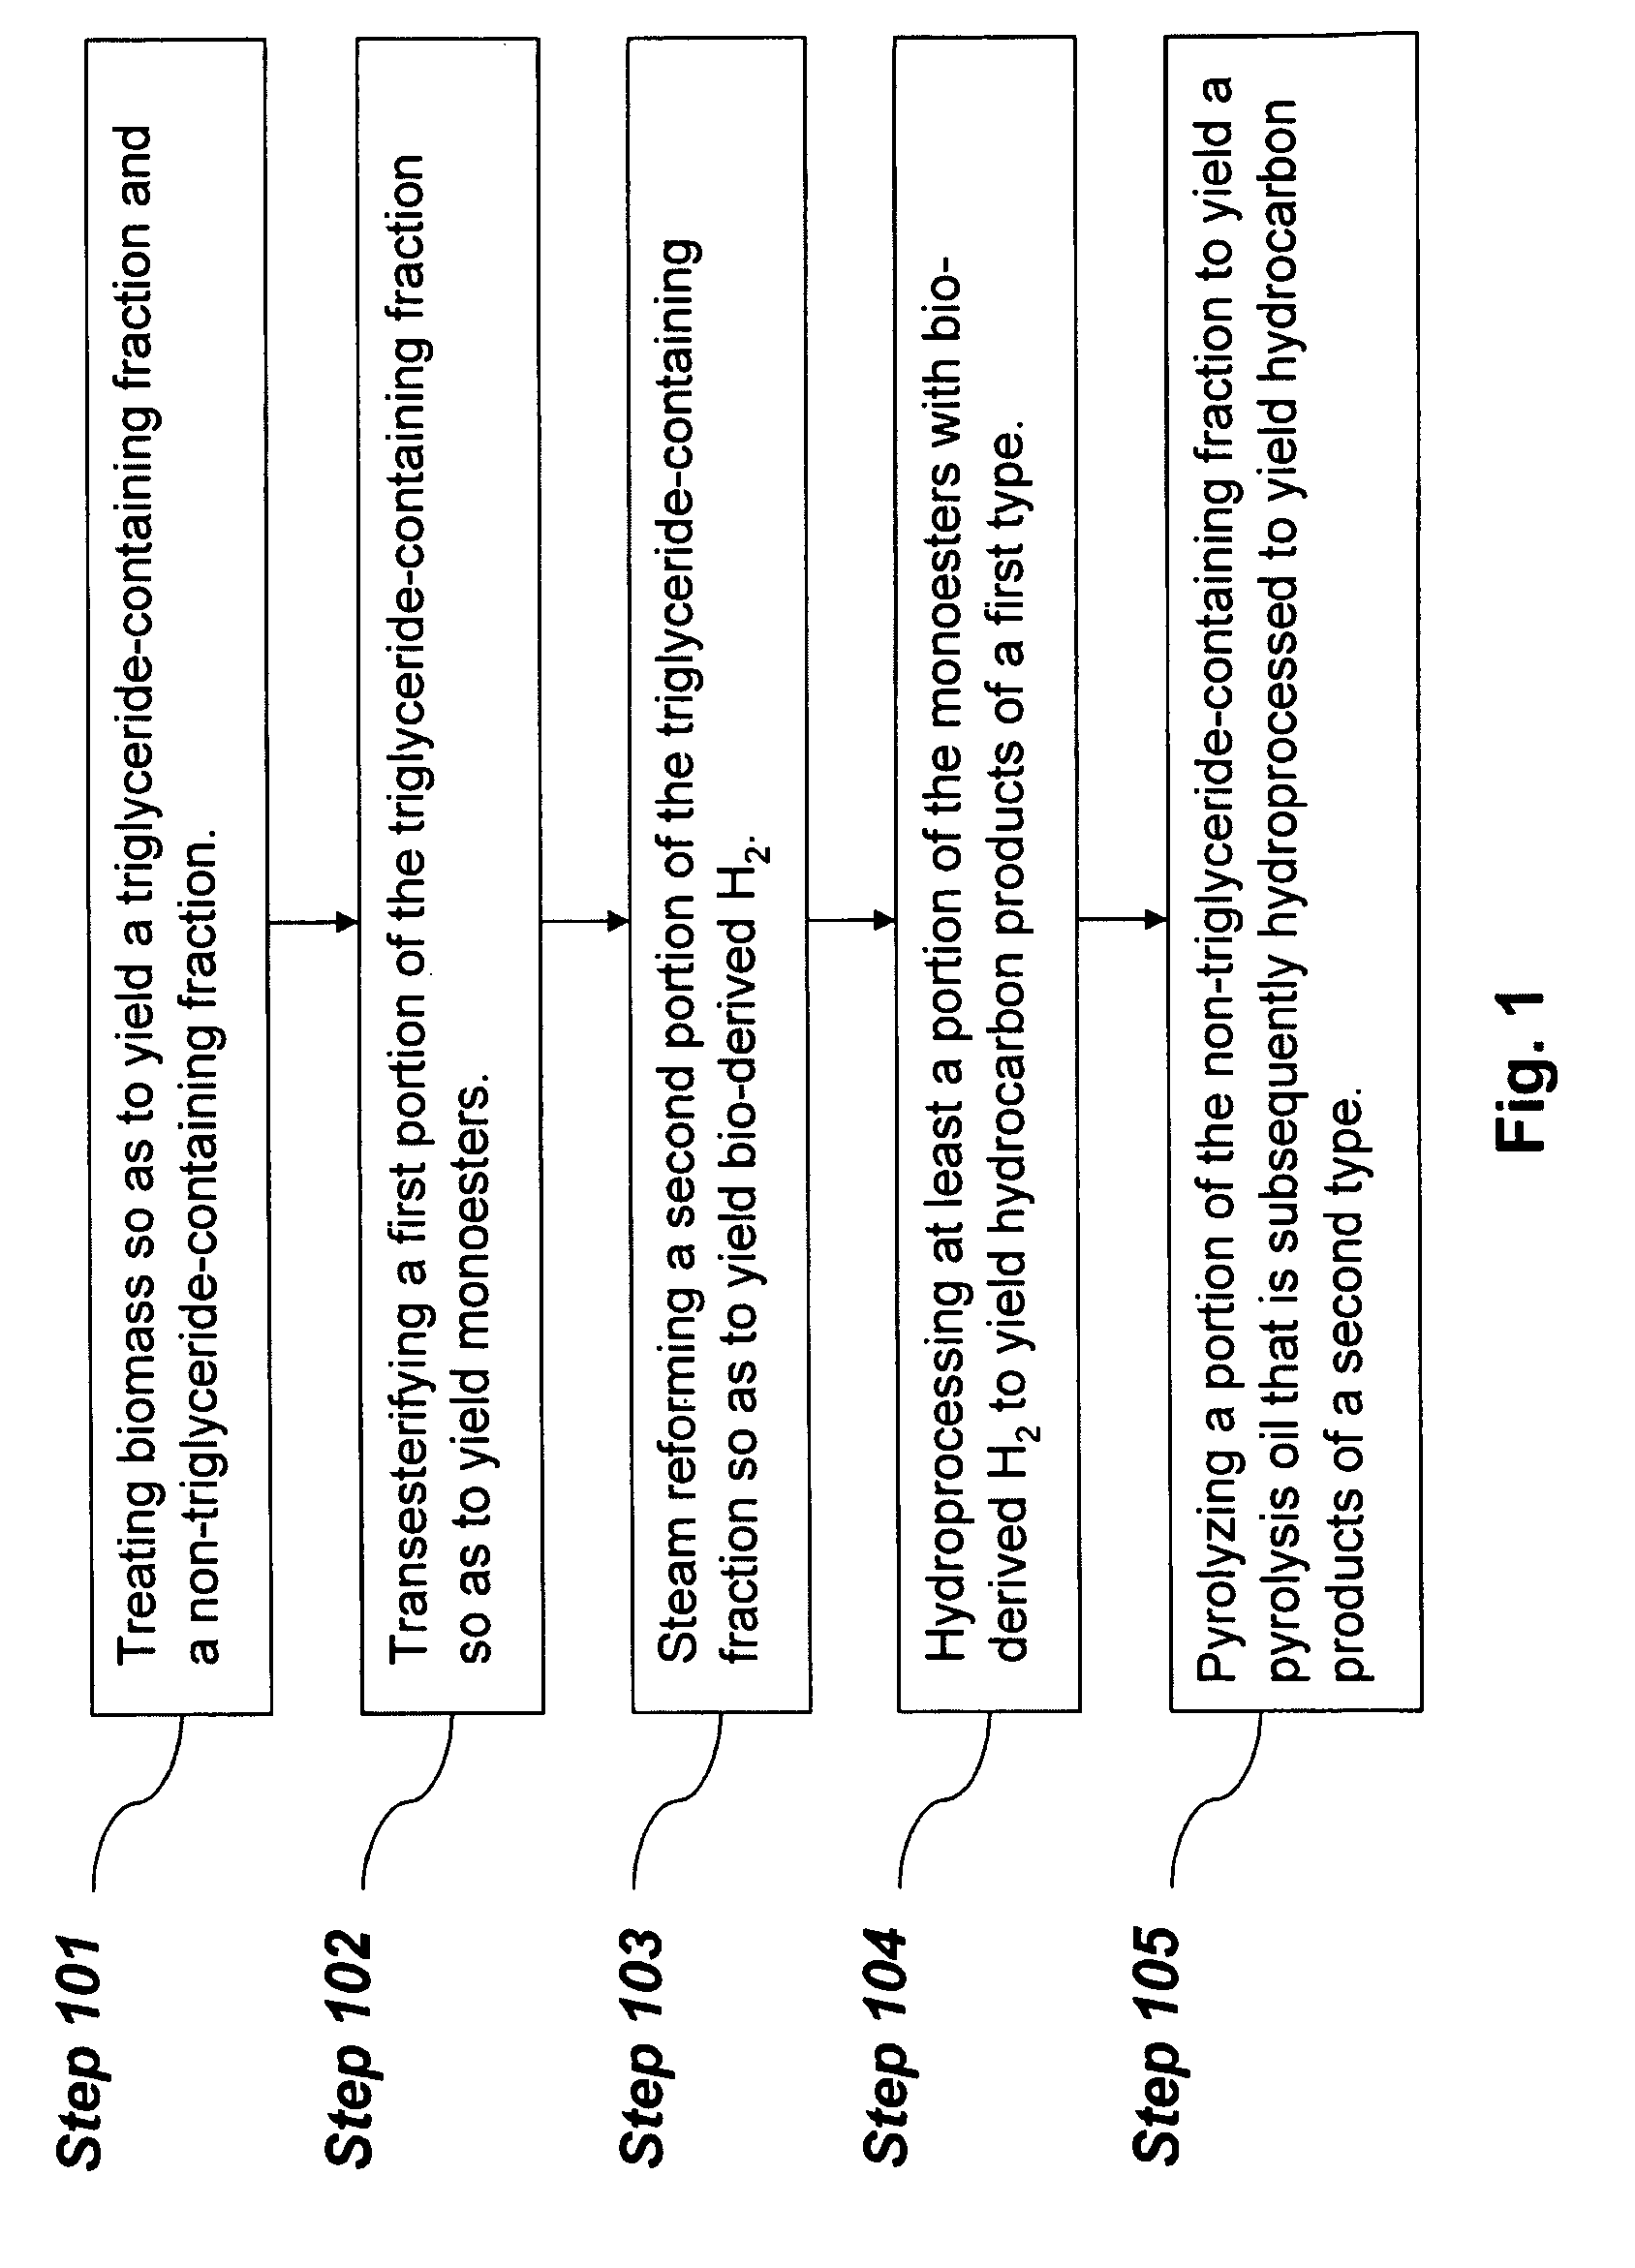 Selective, integrated processing of bio-derived ester species to yield low molecular weight hydrocarbons and hydrogen for the production of biofuels